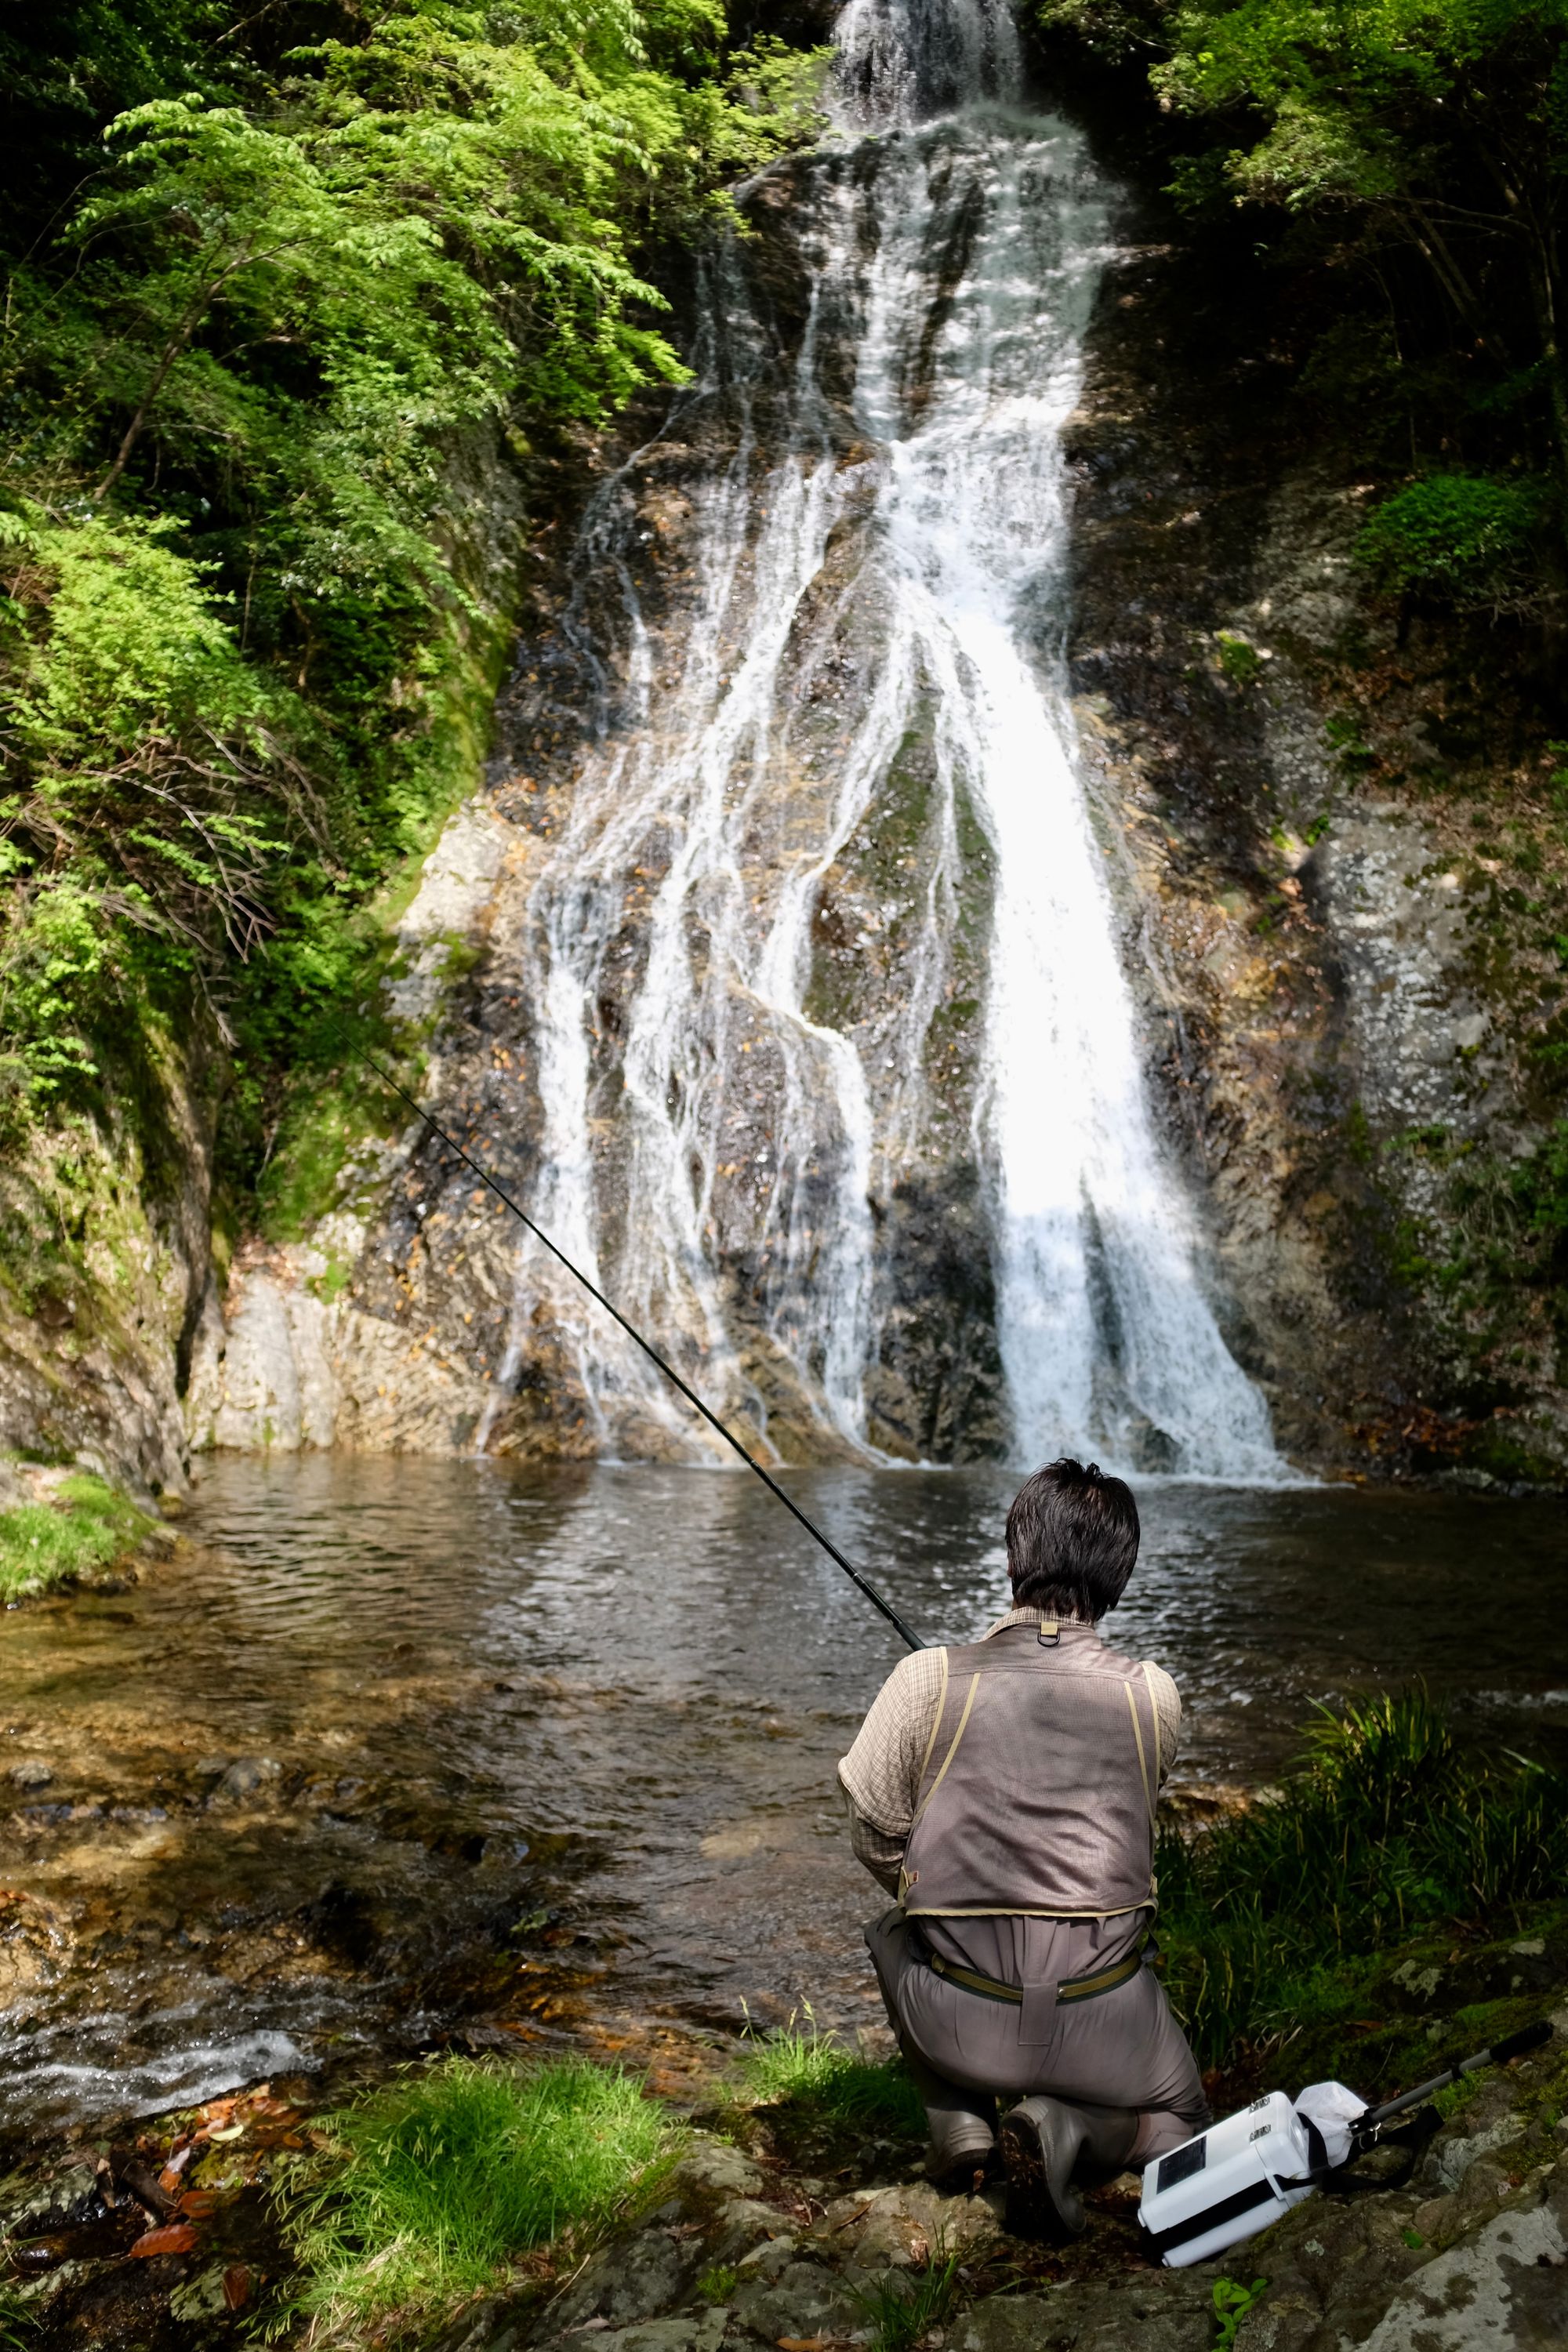 A man fly-fishes in the pool of a high waterfall directly across from him.